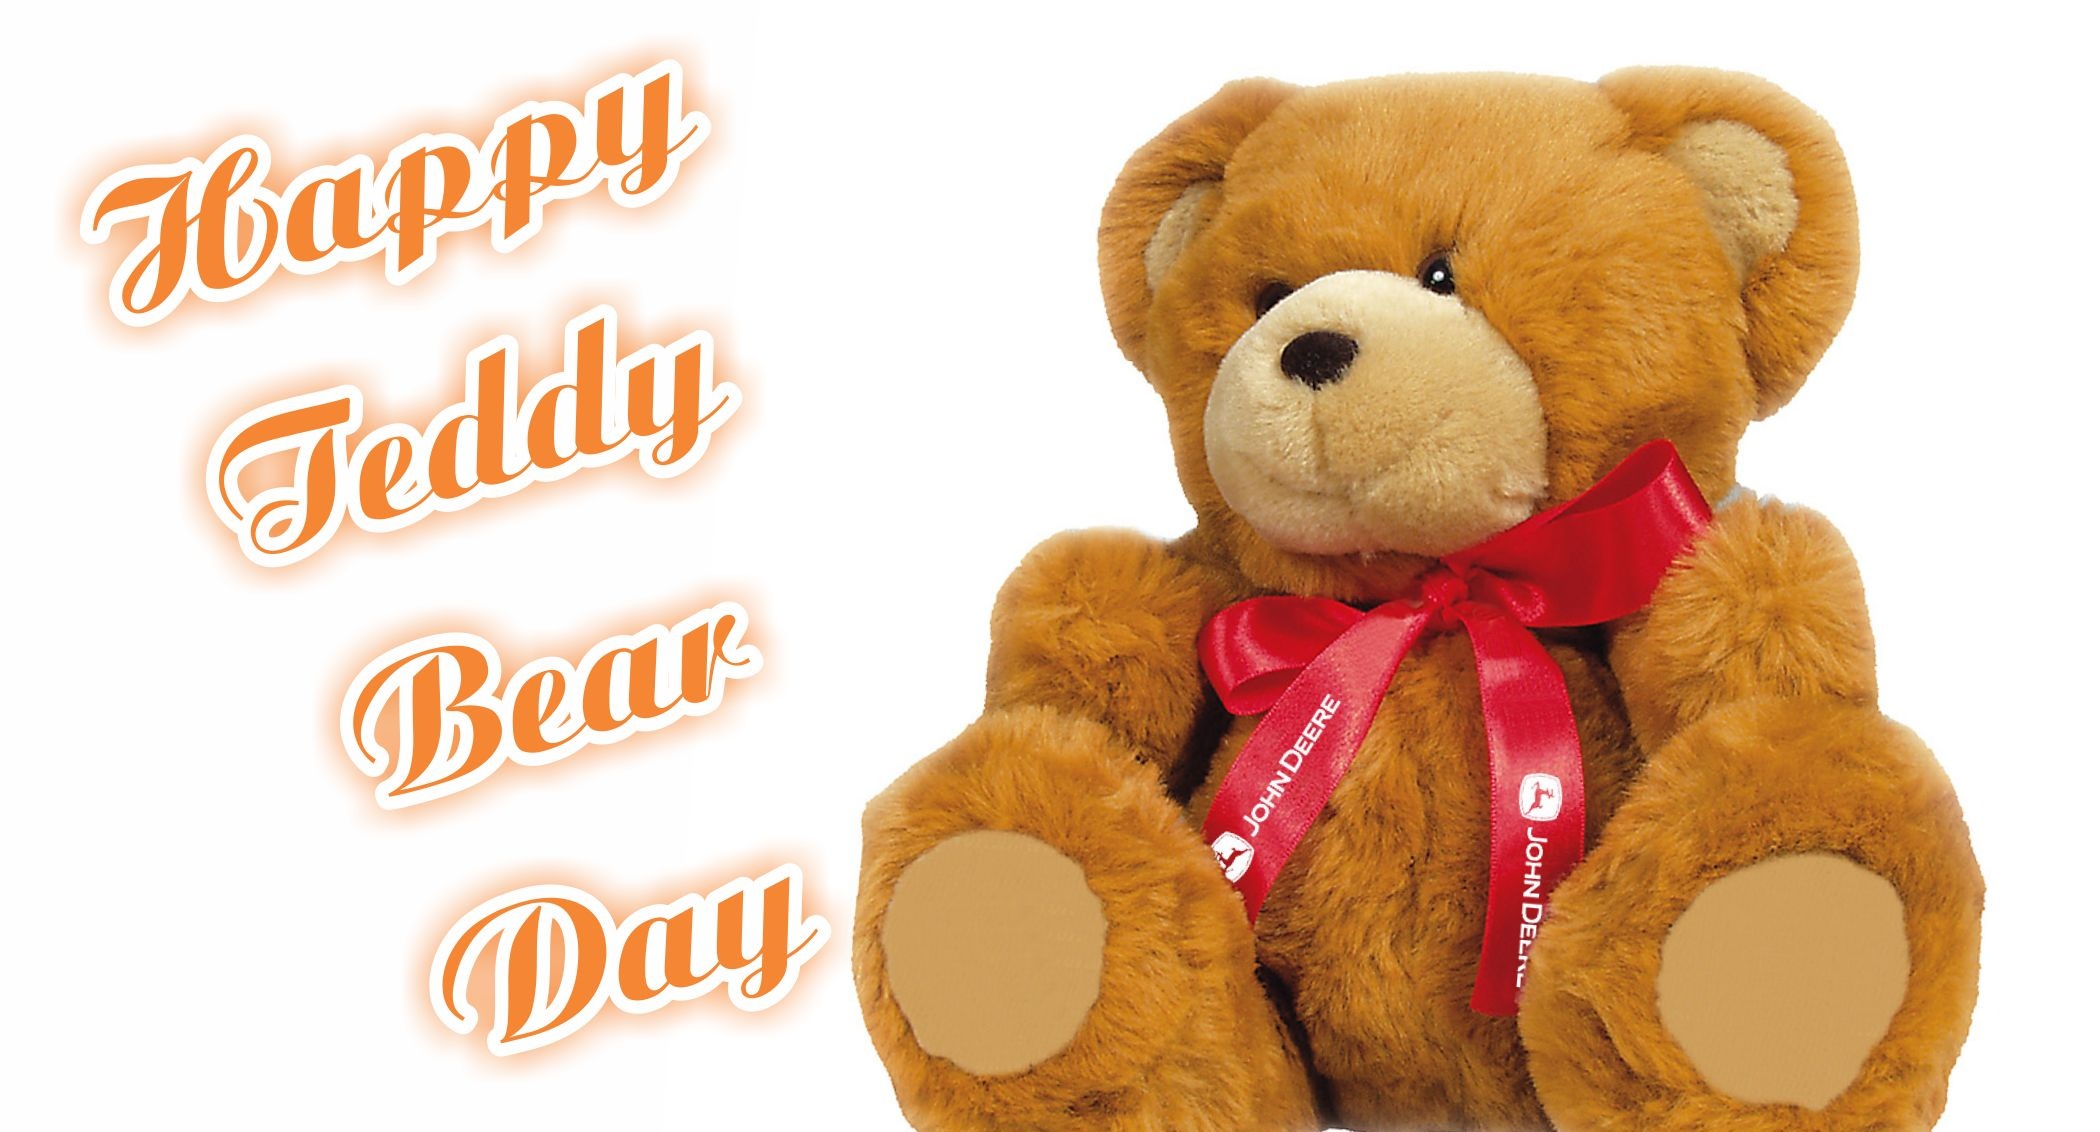 Free Download Happy Teddy Bear Day Pics For Girlfriend - Teddy Day Wallpaper Download , HD Wallpaper & Backgrounds